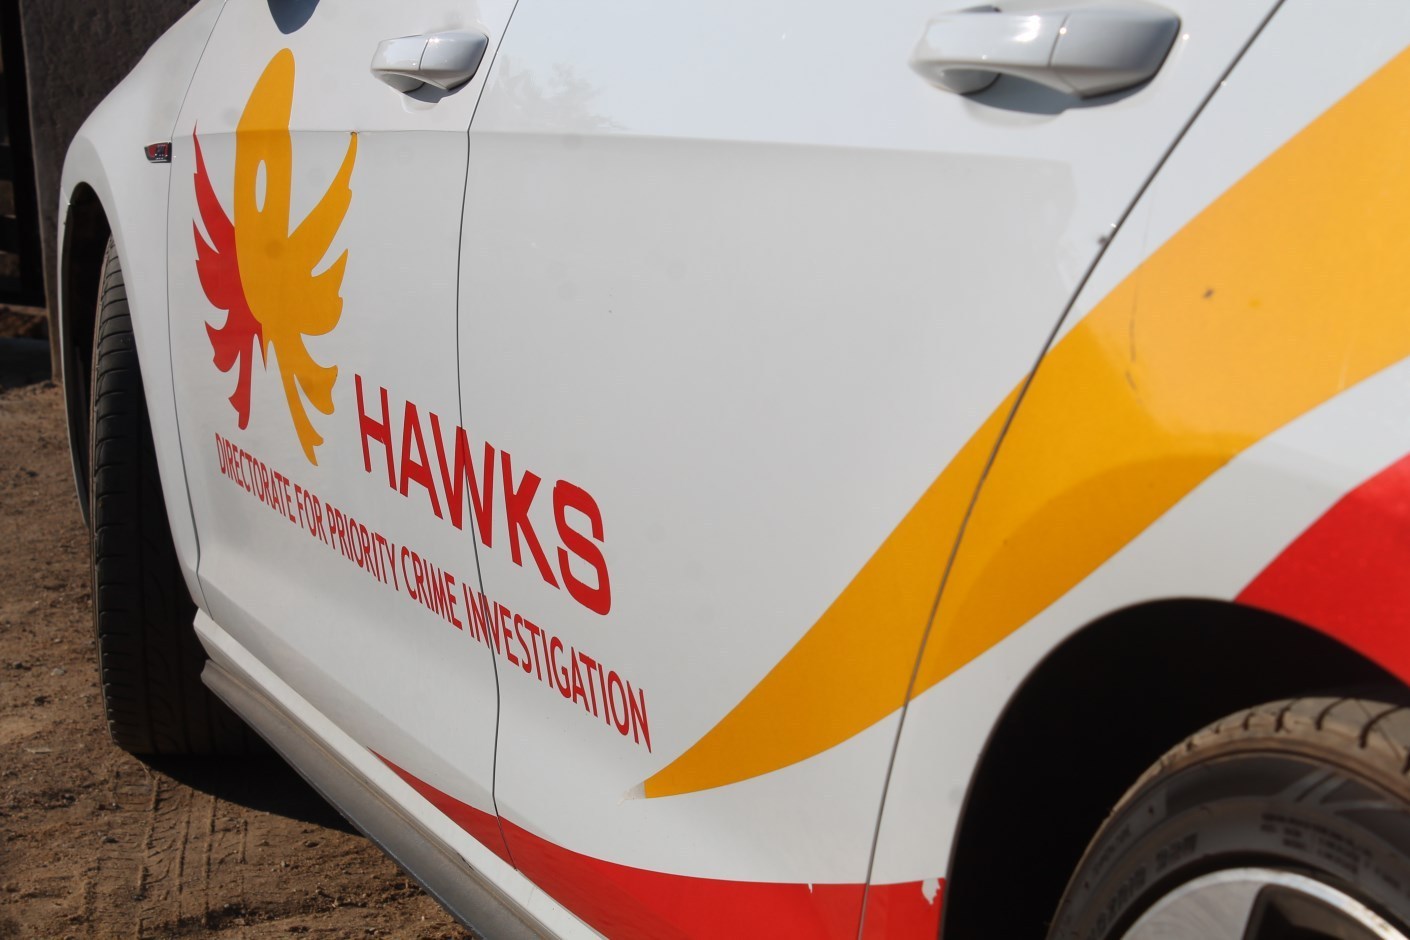 Third Hawk impersonator arrested for extortion